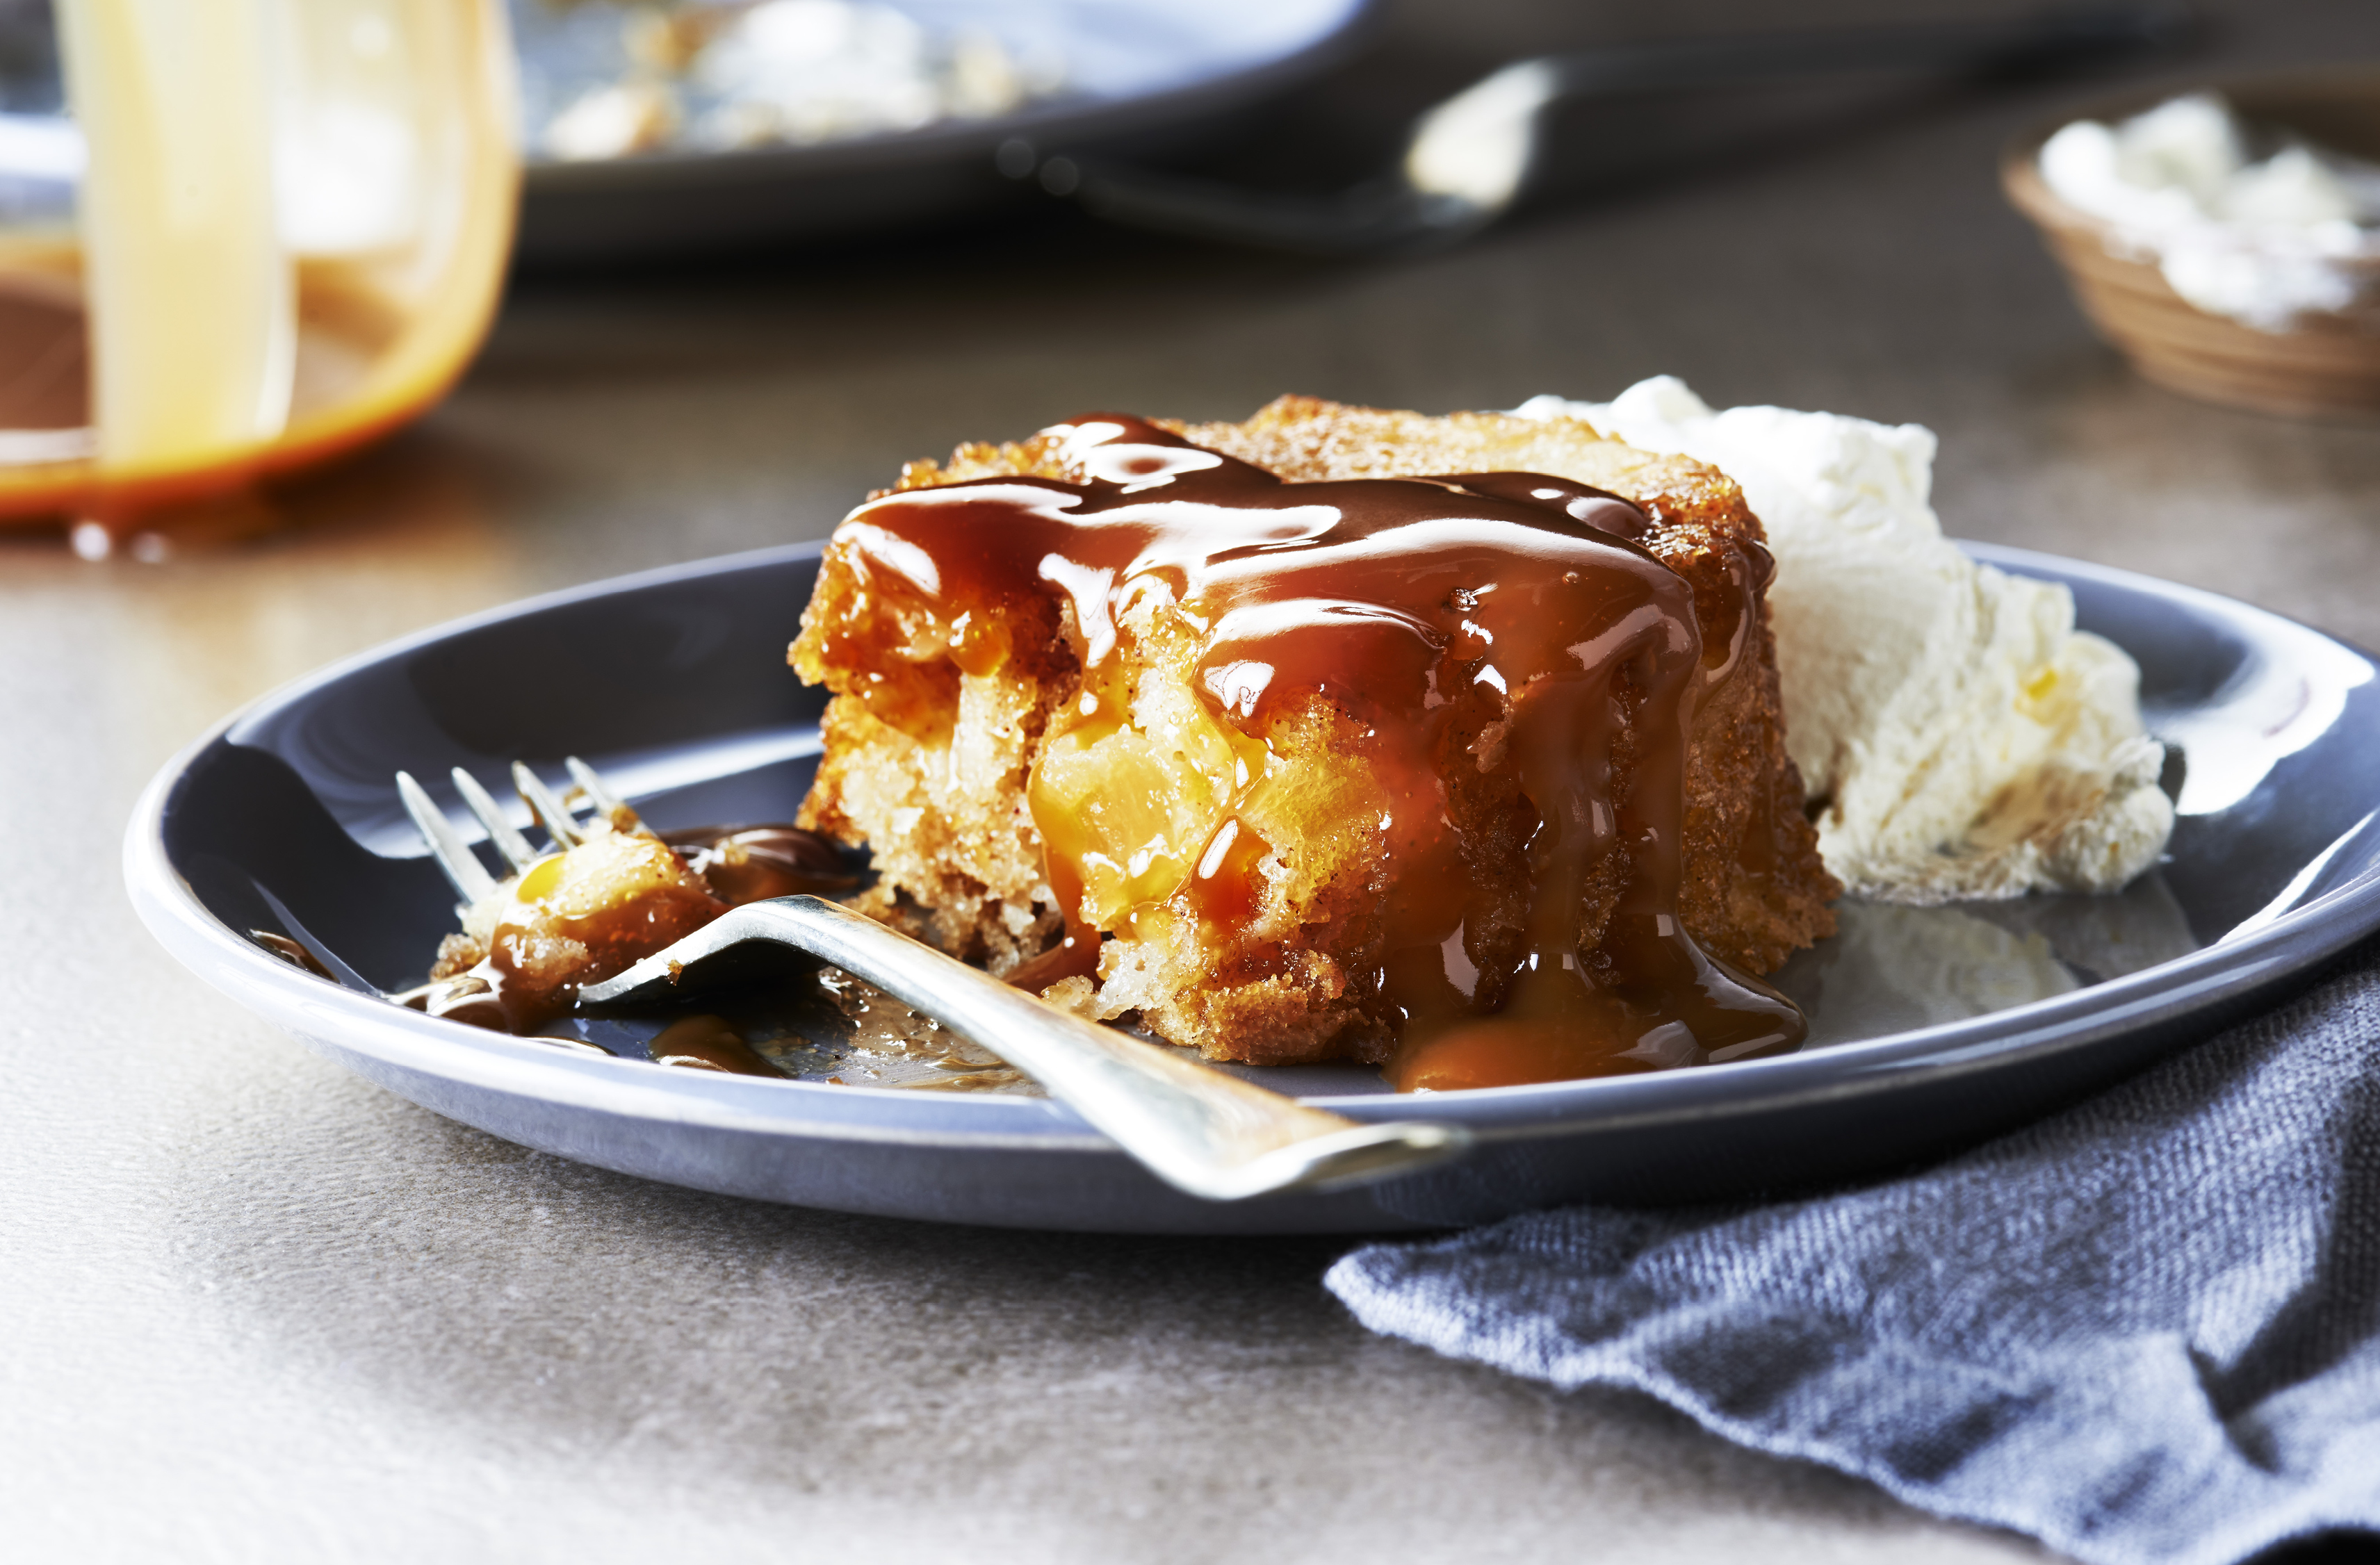 An individual apple cake on a dish covered in brandied dulce de leche sauce
